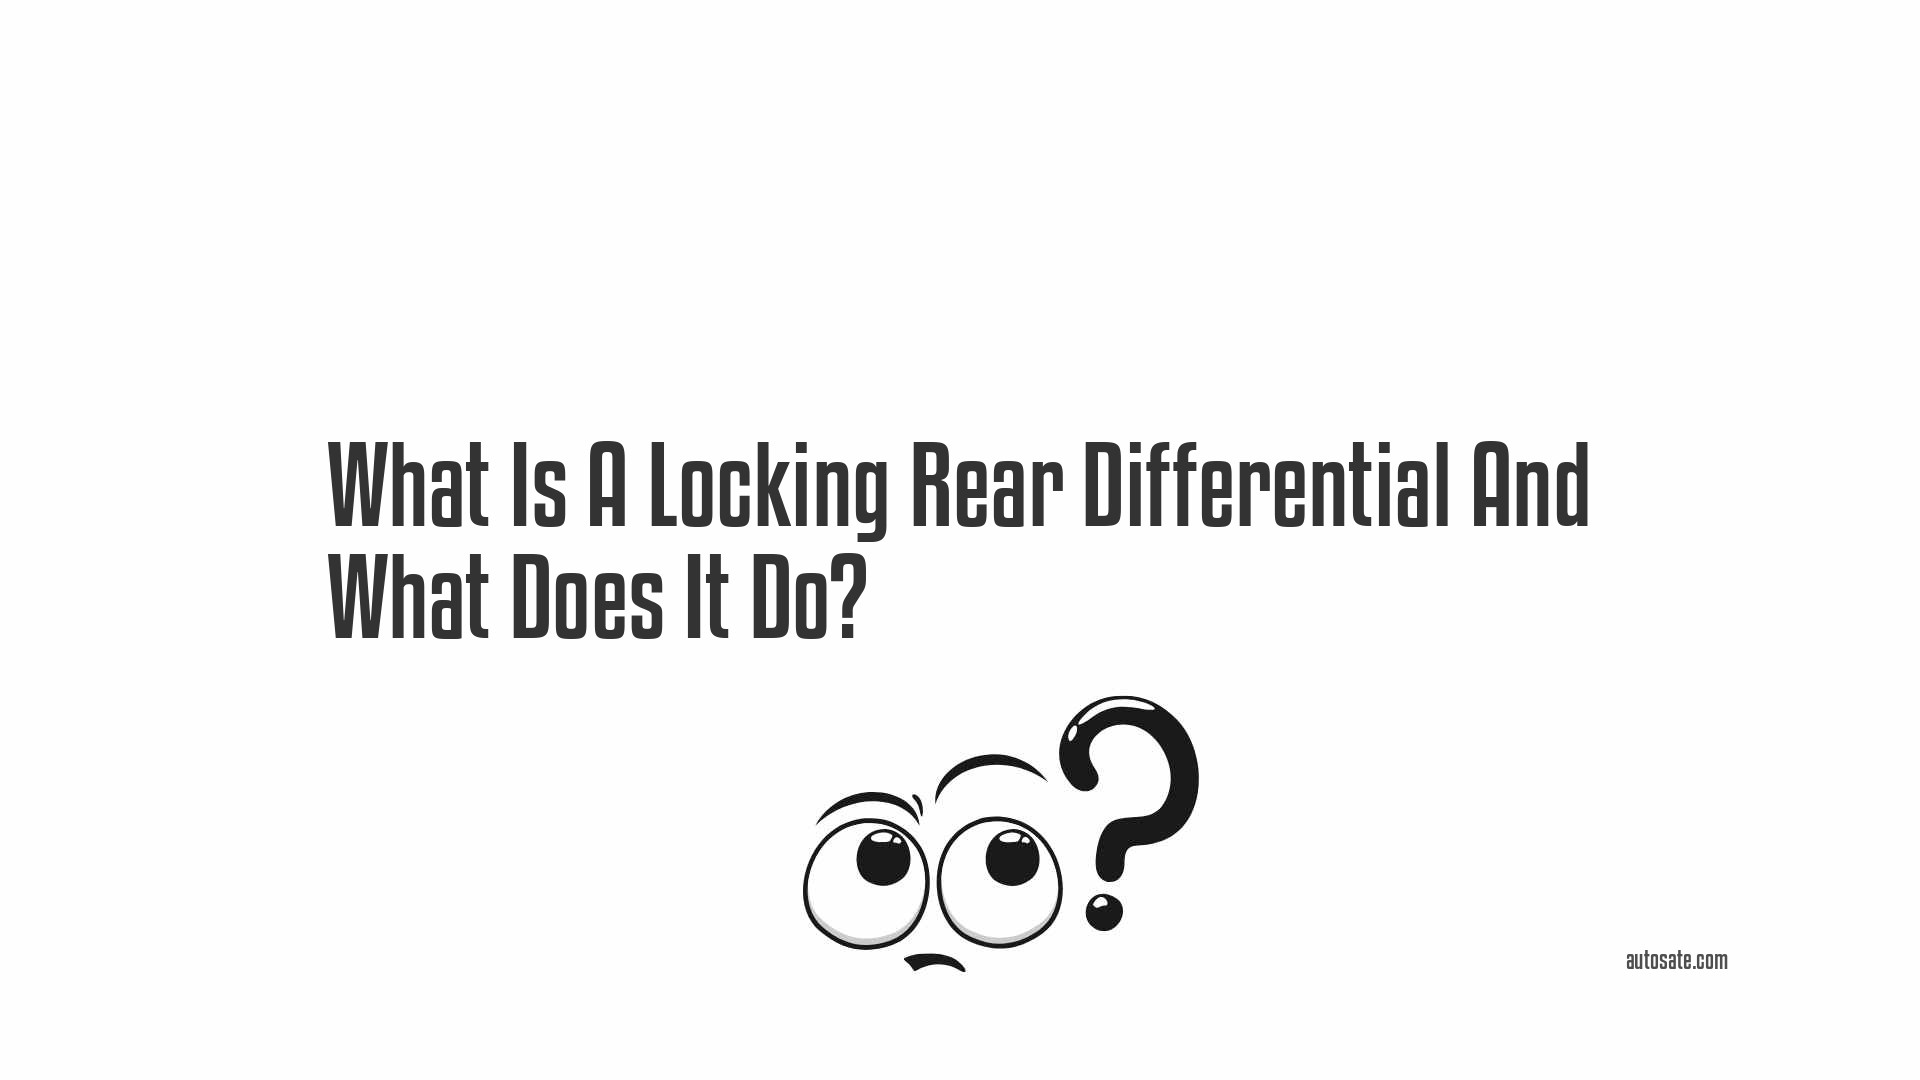 What Is A Locking Rear Differential And What Does It Do?